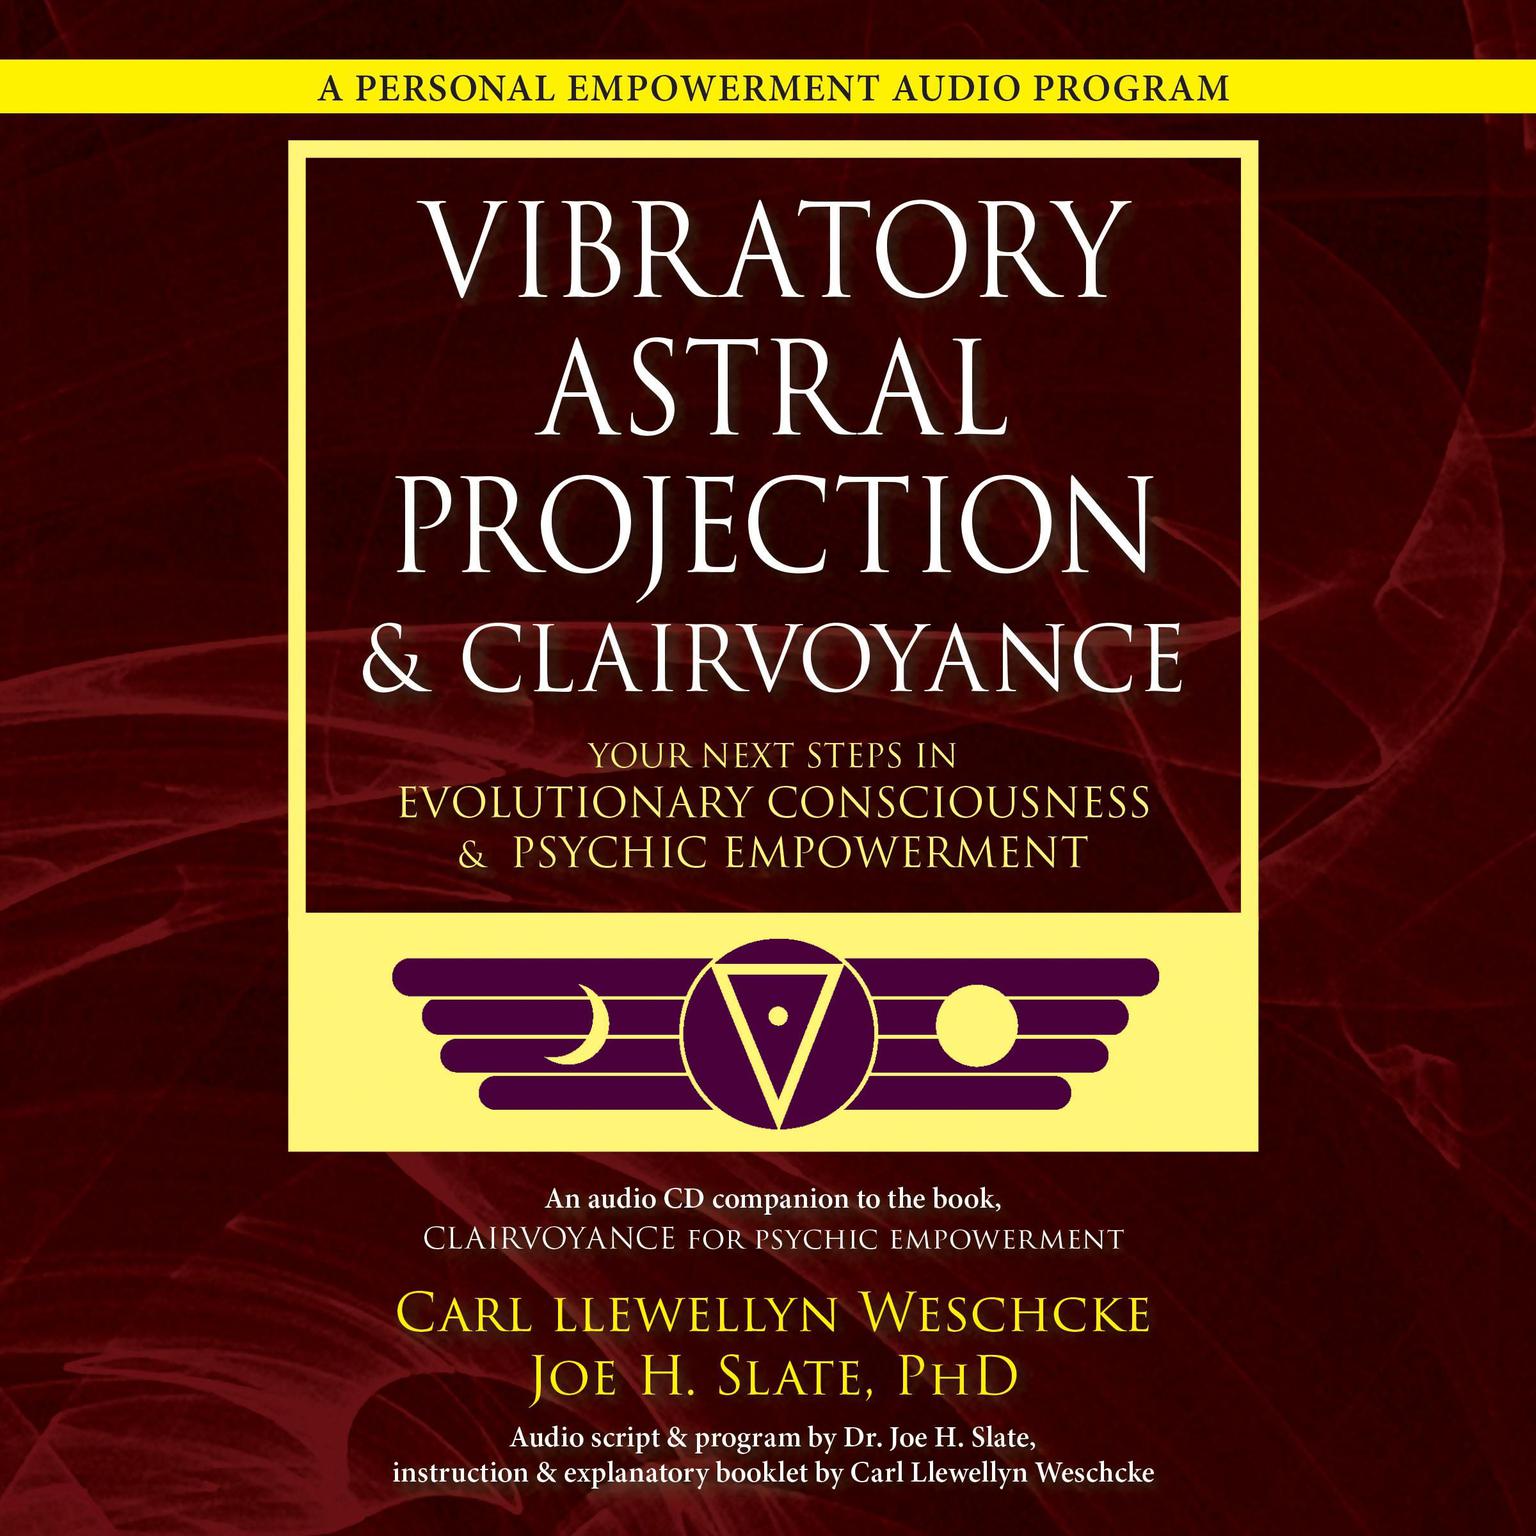 Vibratory Astral Projection & Clairvoyance: Your Next Steps in Evolutionary Consciousness & Psychic Empowerment Audiobook, by Carl Llewellyn Weschcke